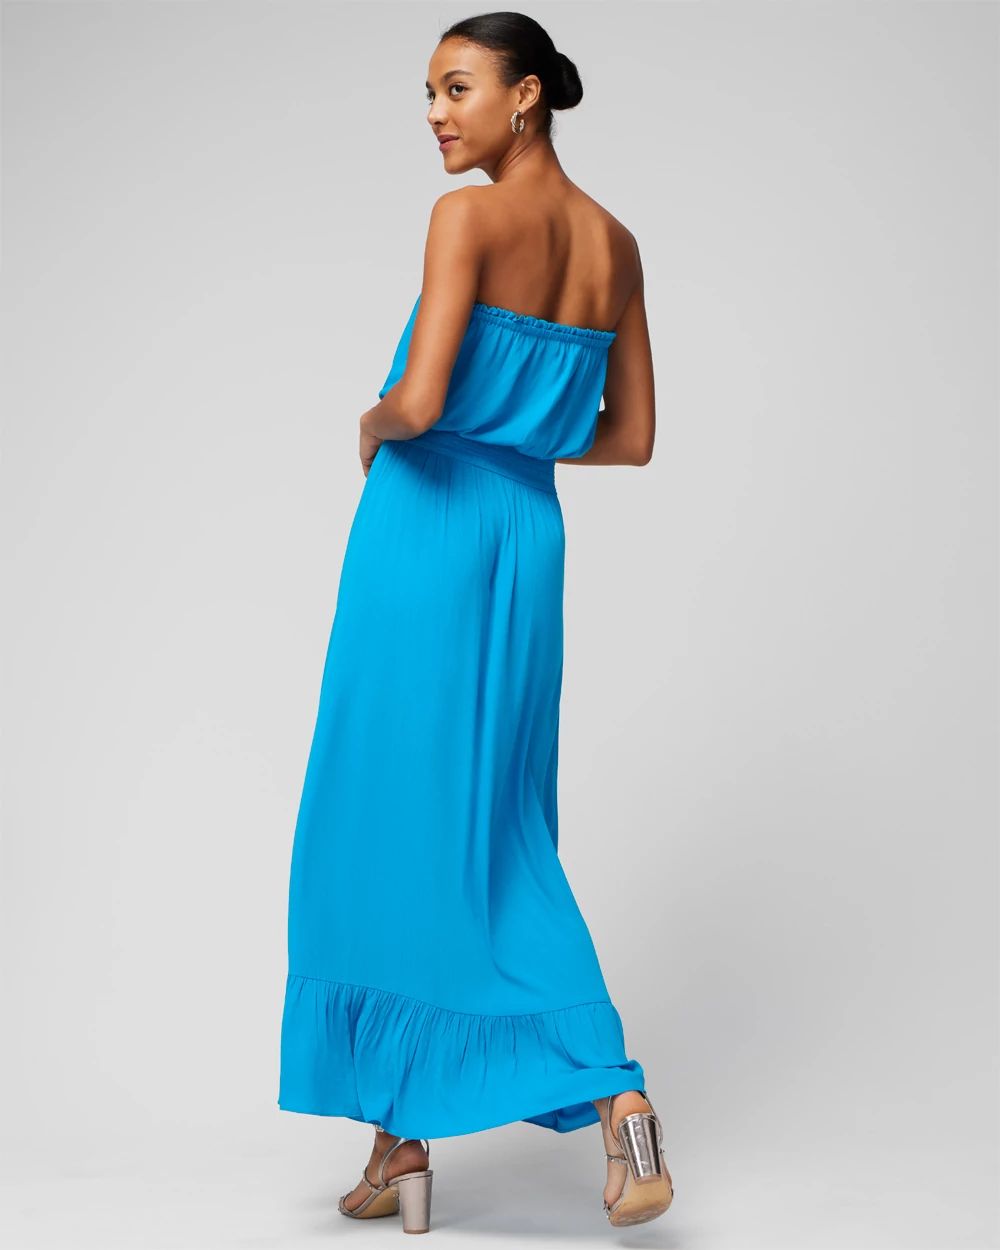 Strapless Maxi Coverup click to view larger image.